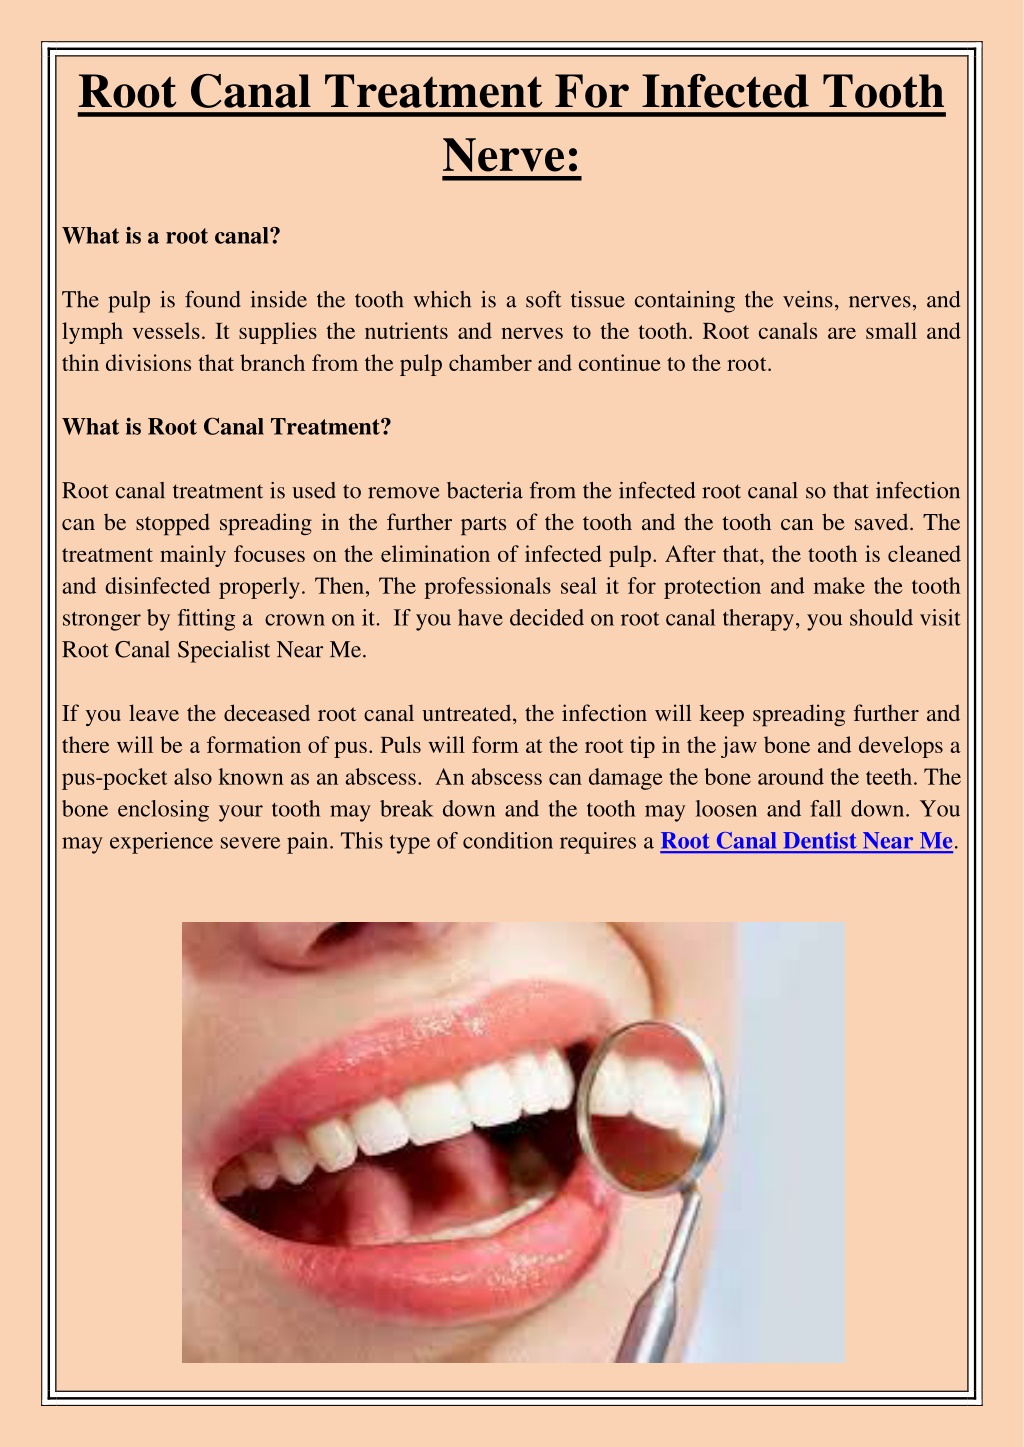 PPT - Root Canal Treatment For Infected Tooth Nerve PowerPoint ...